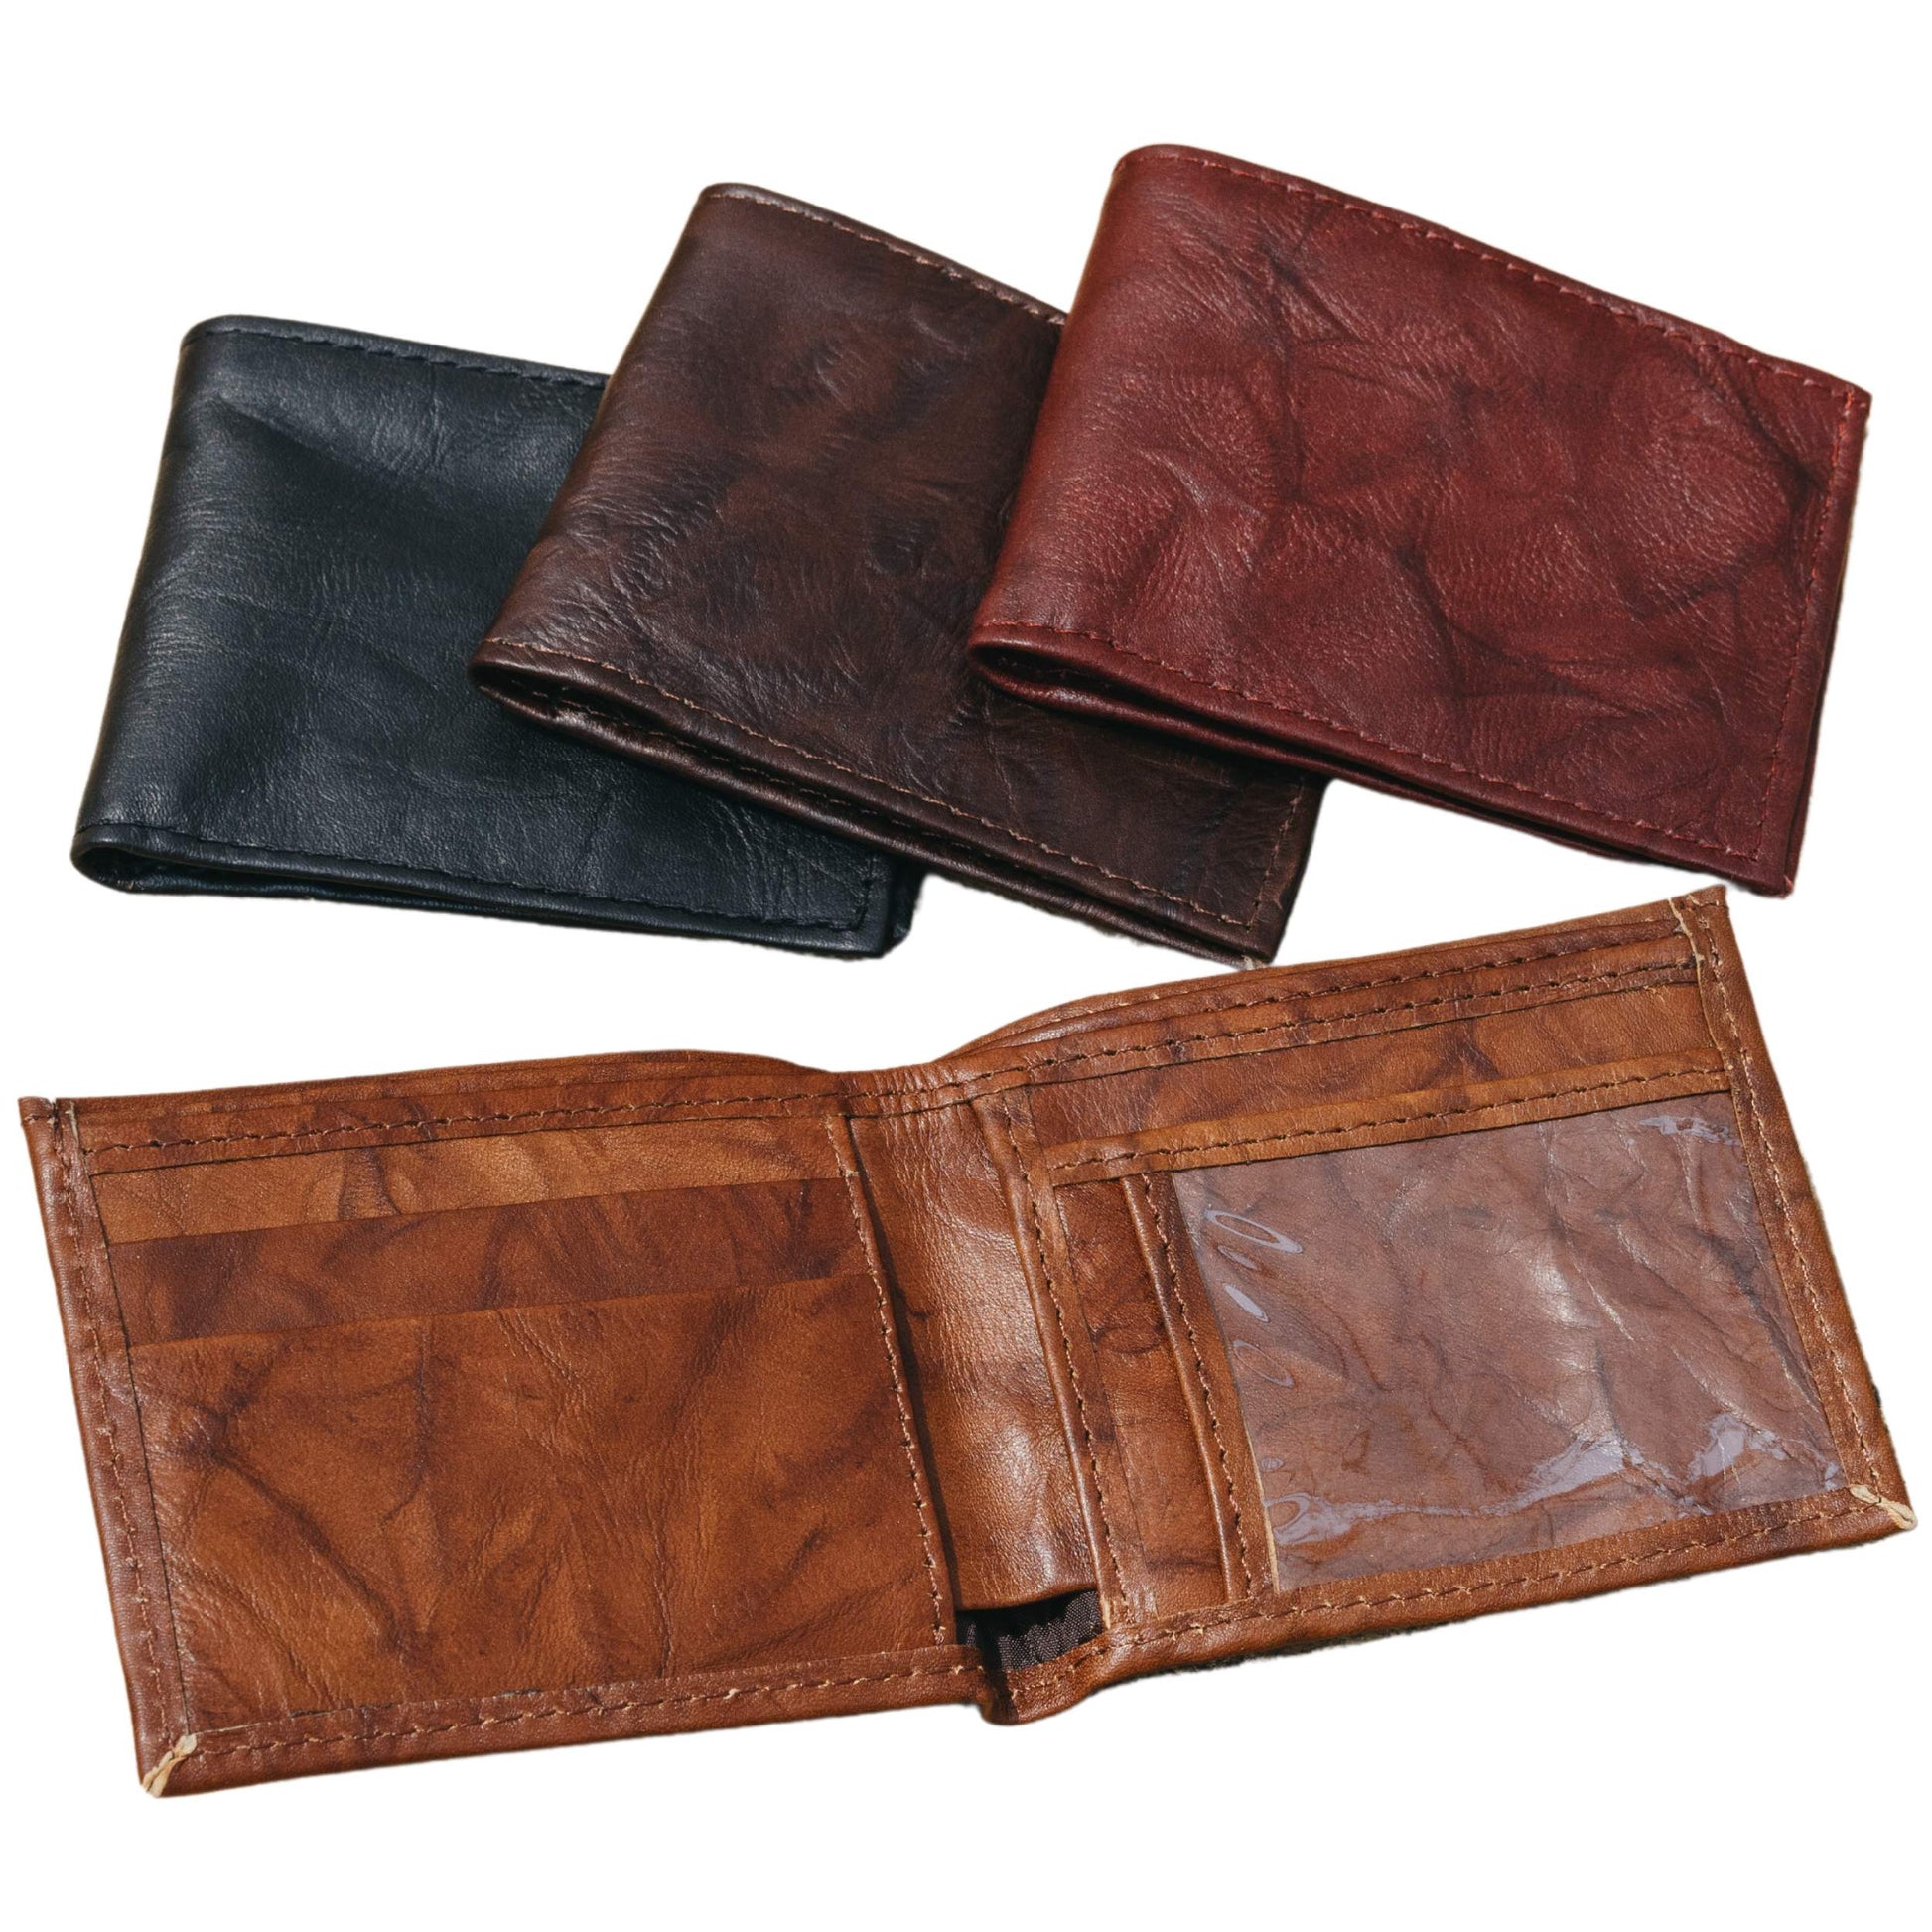 Mens Leather Bifold Wallet with ID Window - Handmade Leather Goods Duna Red Wine Leather